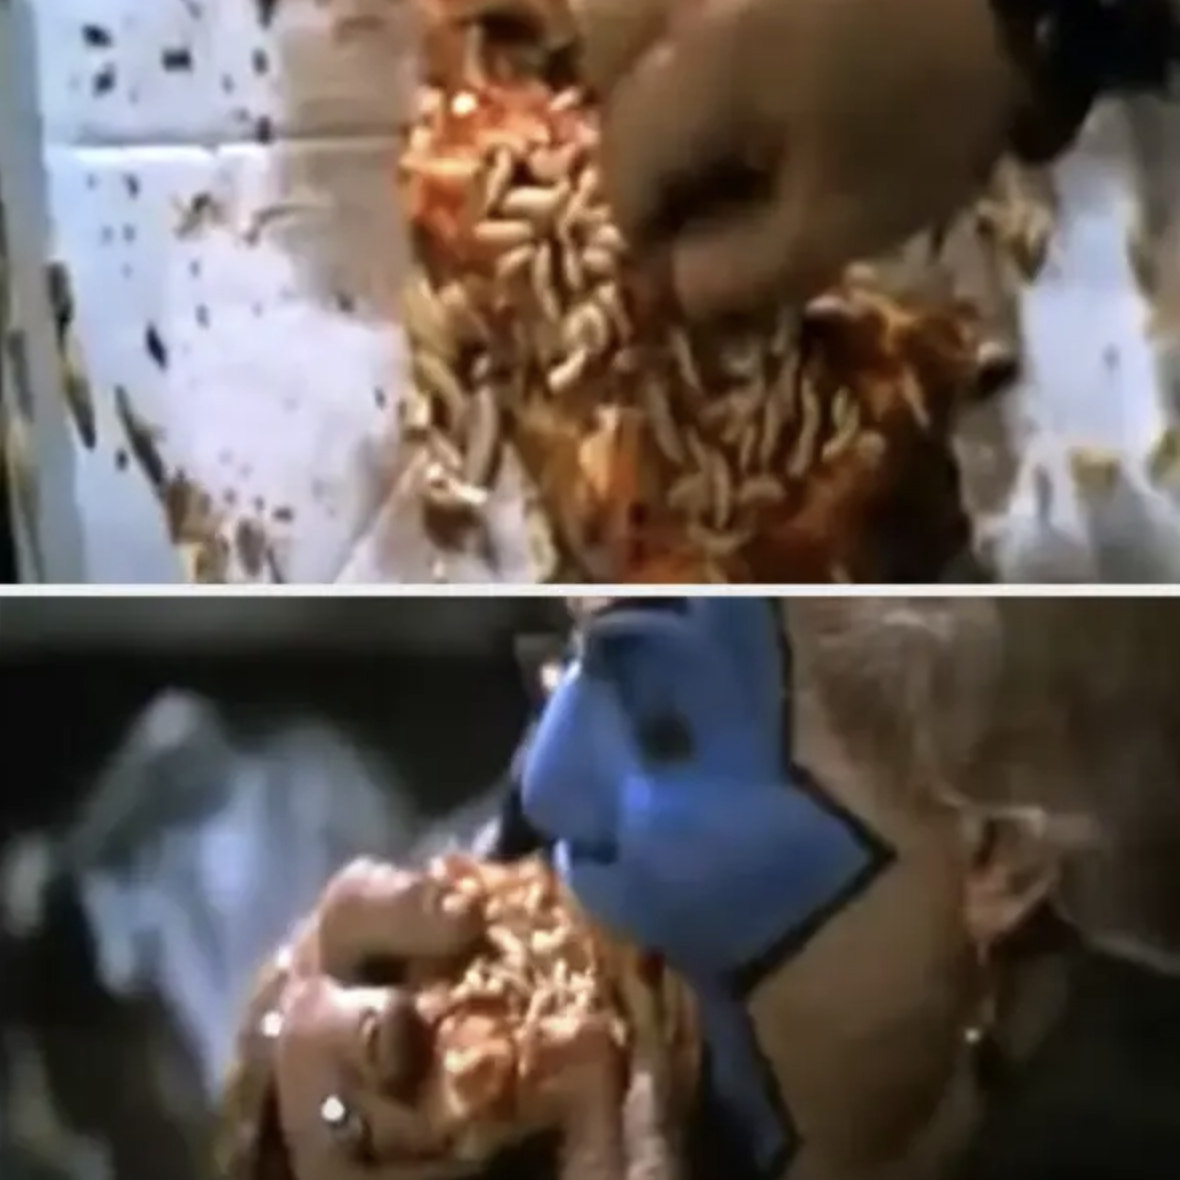 in a a scene from the movie, John shoves a piece of maggot-covered pizza in his mouth